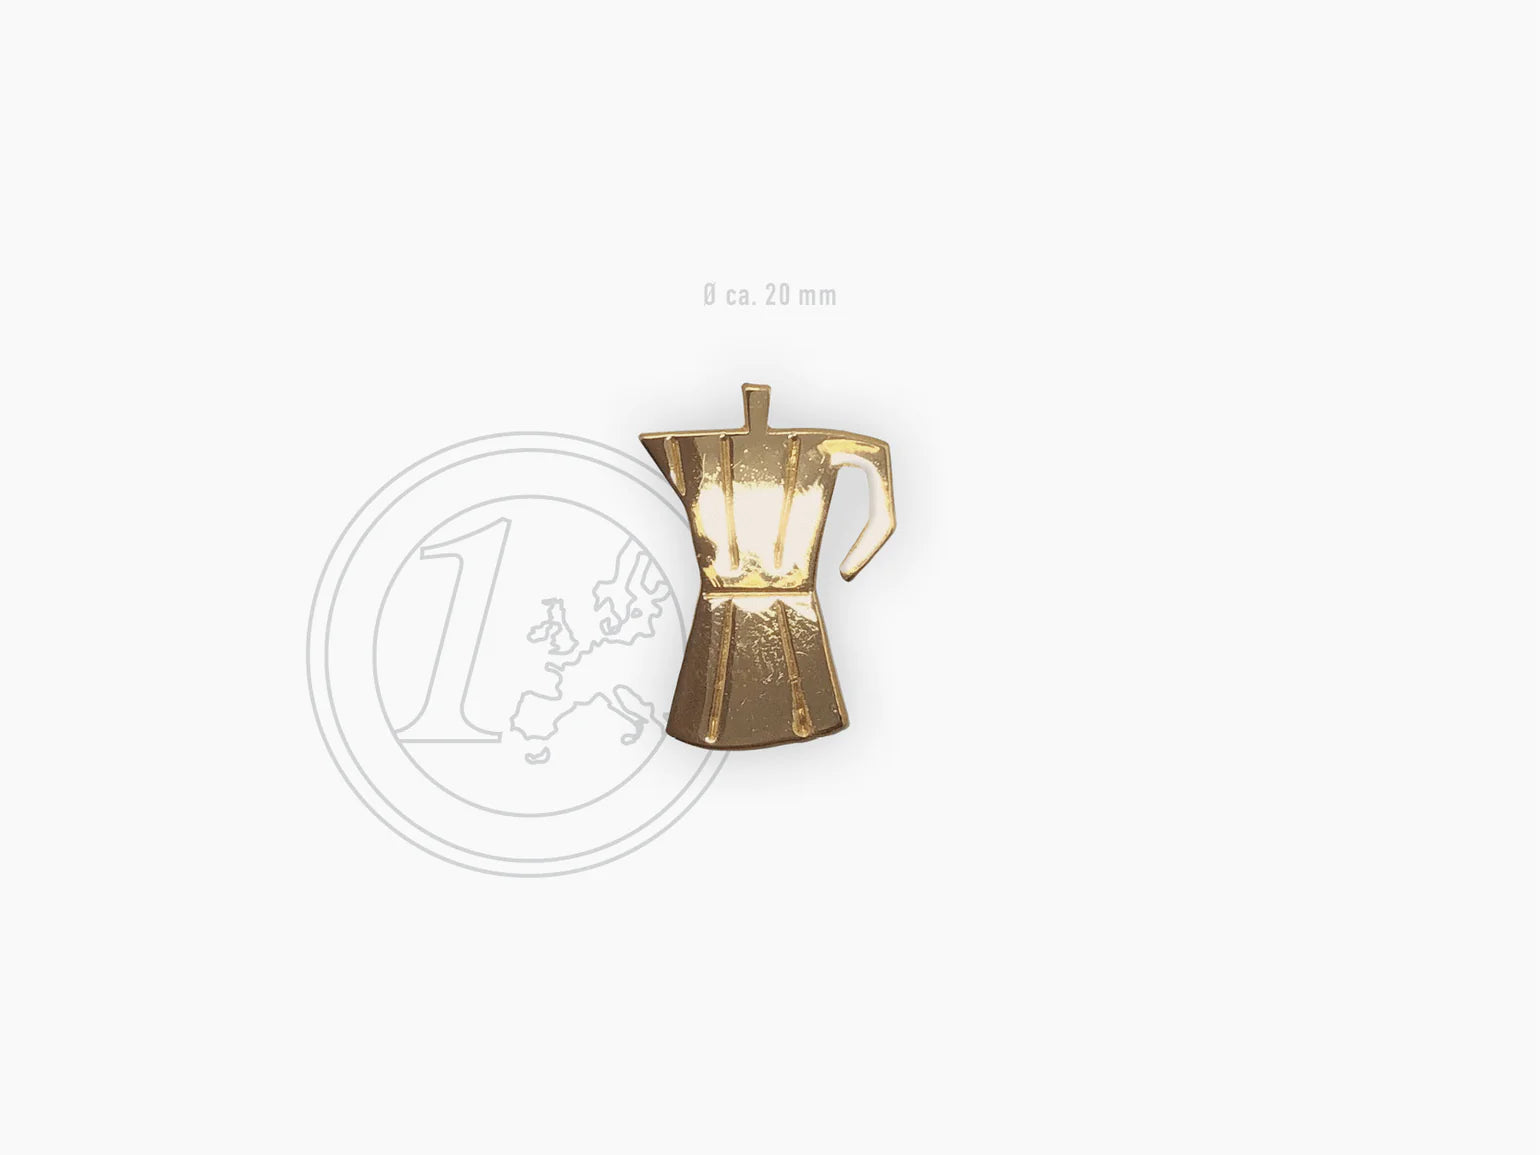 gold plated handmade coffee pot pin by Typealive, size comparison with euro coin